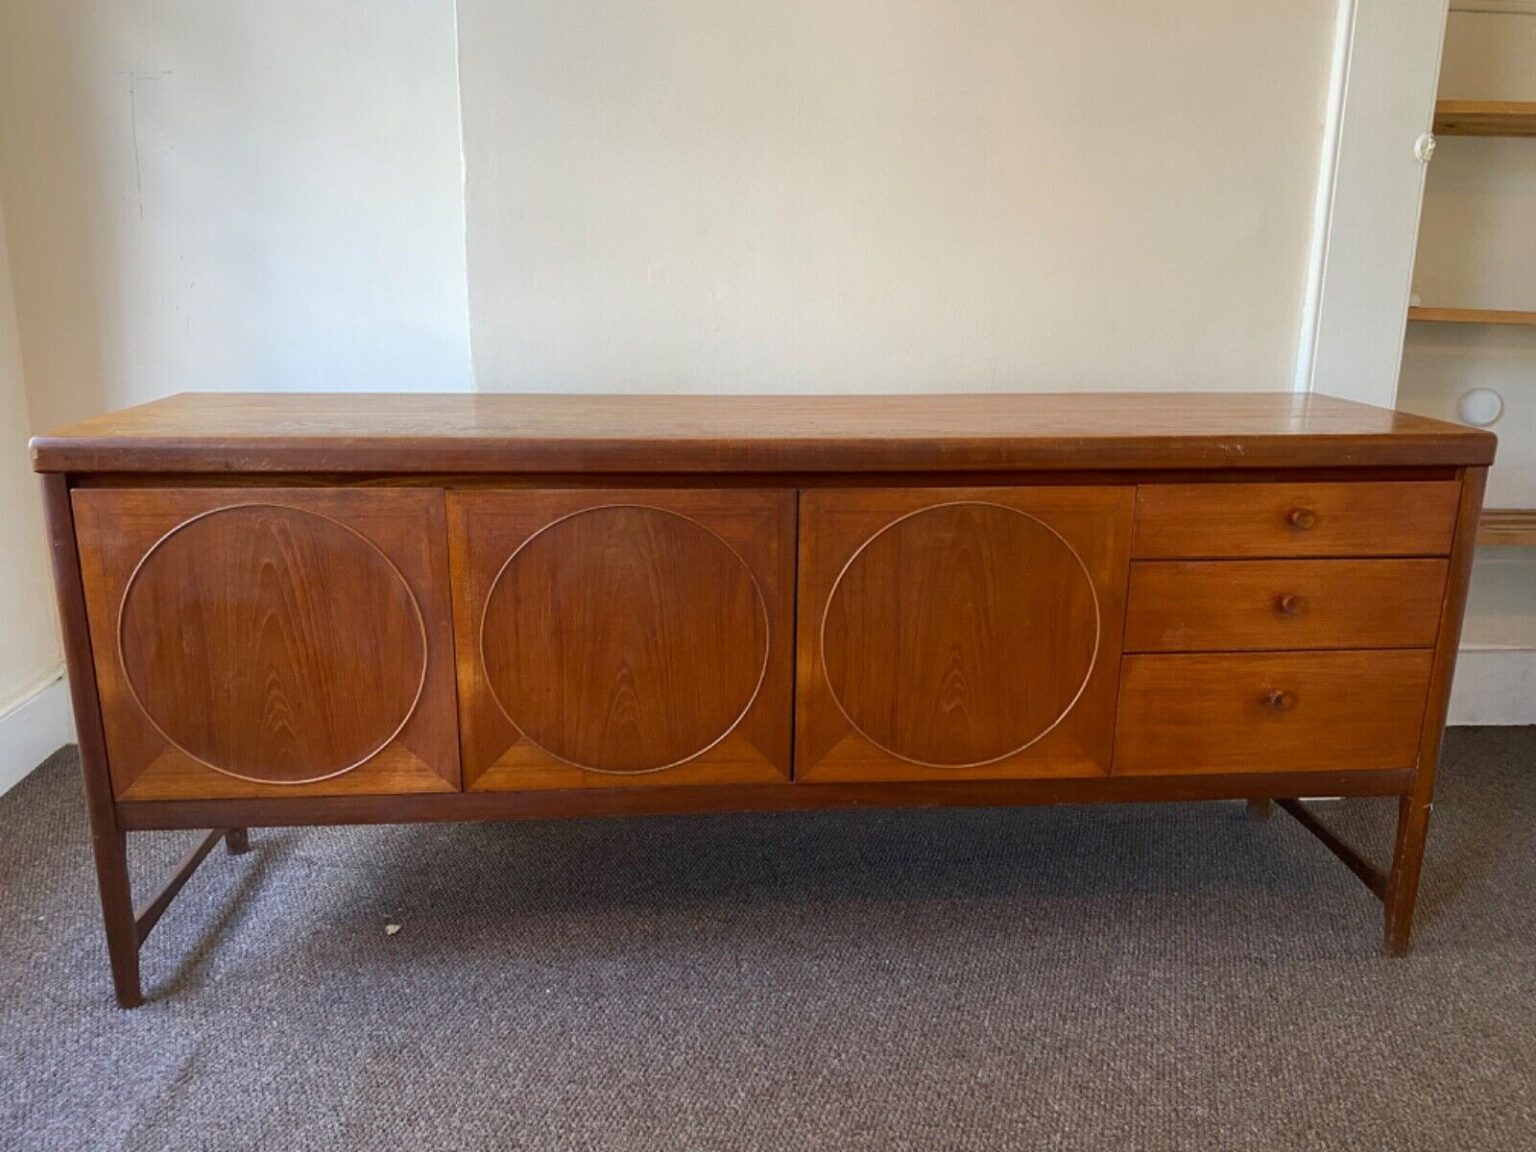 Teak Mid Century Modern sideboard 3x Drawers and 3x doors. Town and Country Antiques